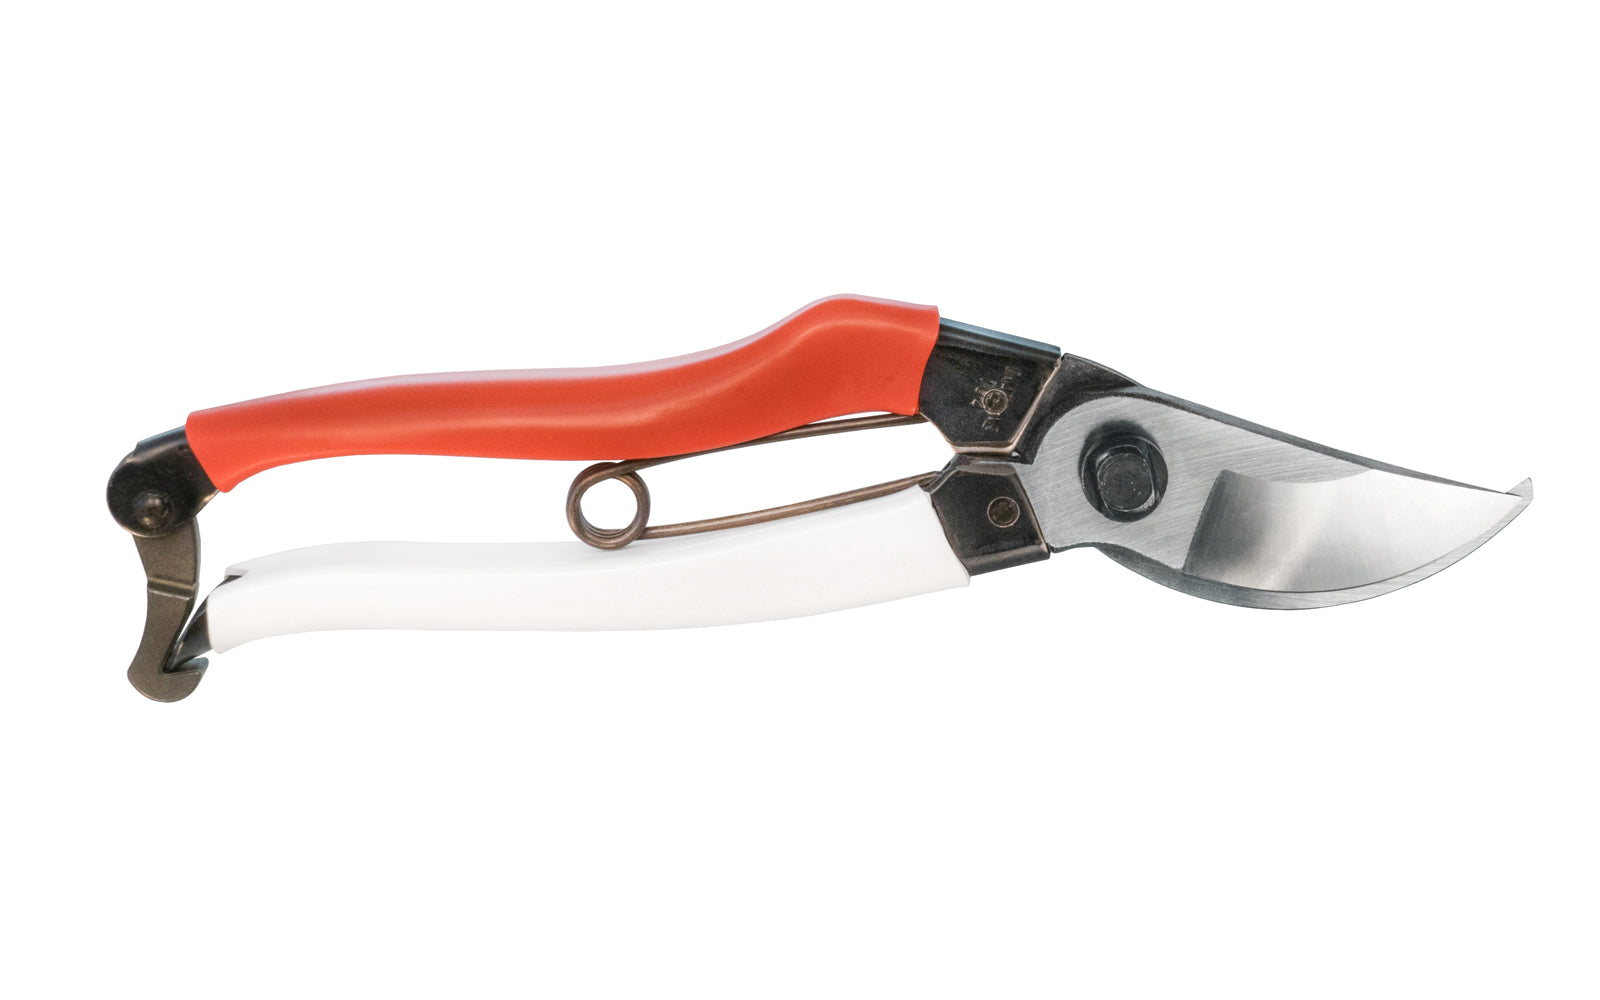 The Japanese Okatsune No. 104 bypass large pruners are excellent high quality elegant pruners. 8-1/4